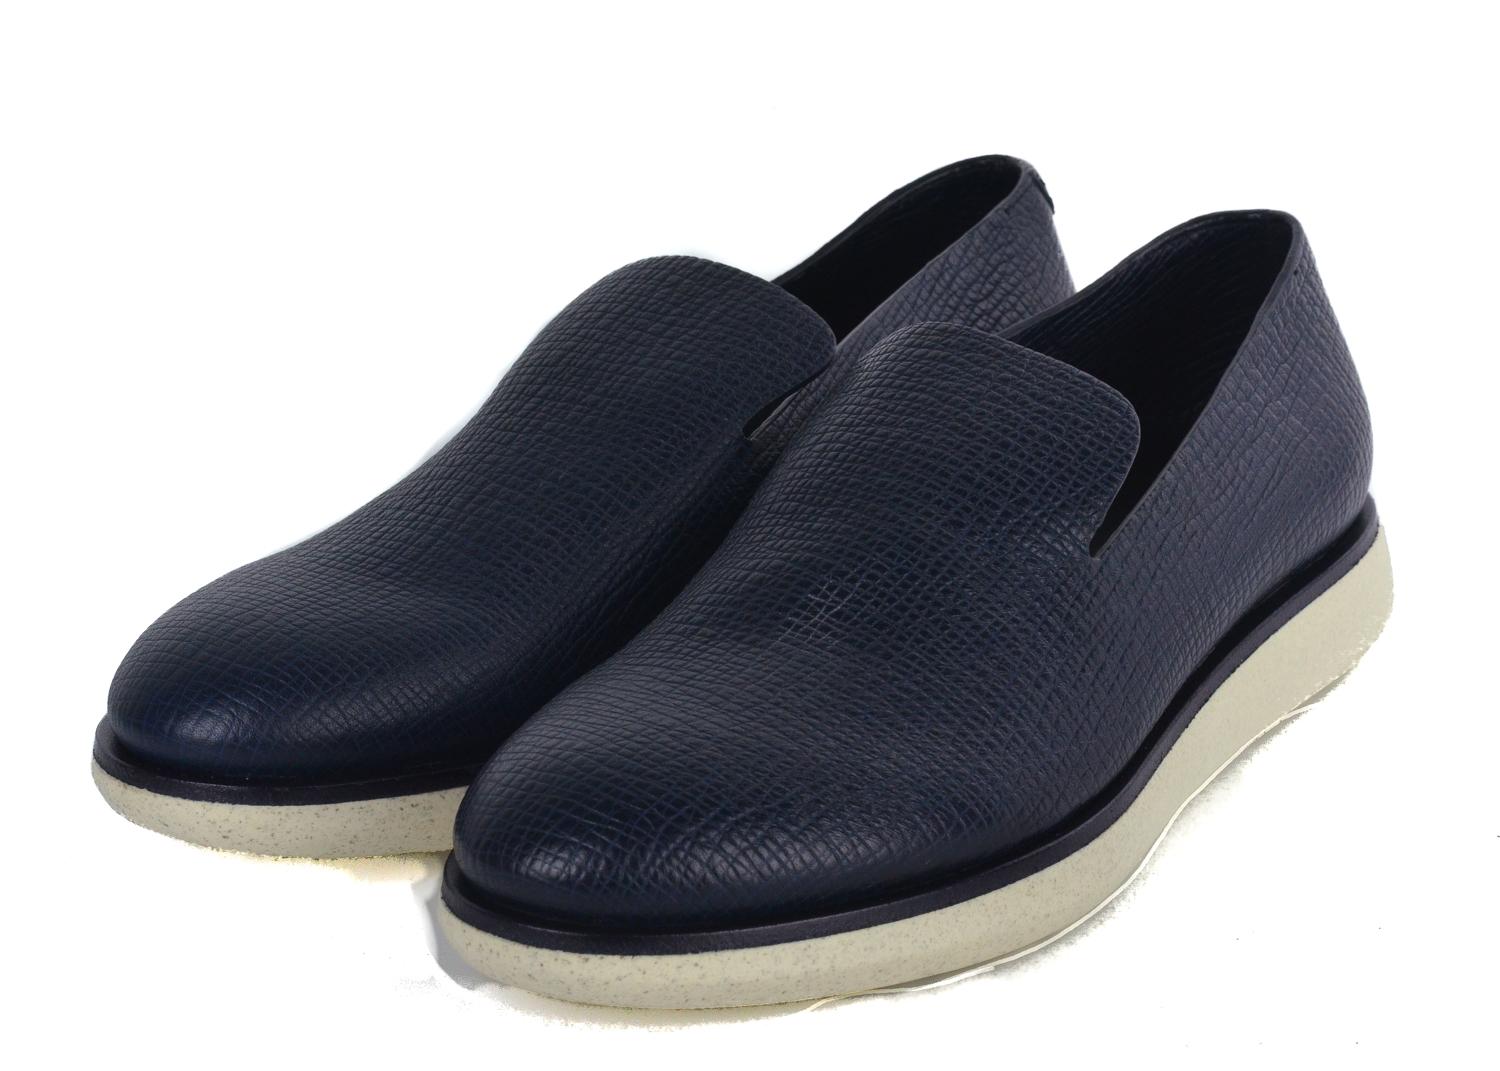 Change the tempo in the room with your Giorgio Armani Slip on Sneakers. These richly textured pair features cross grained striated leather, a deep navy blue color, and firm crisp white rubber sole. This newly reformed loafer style sneaker can be